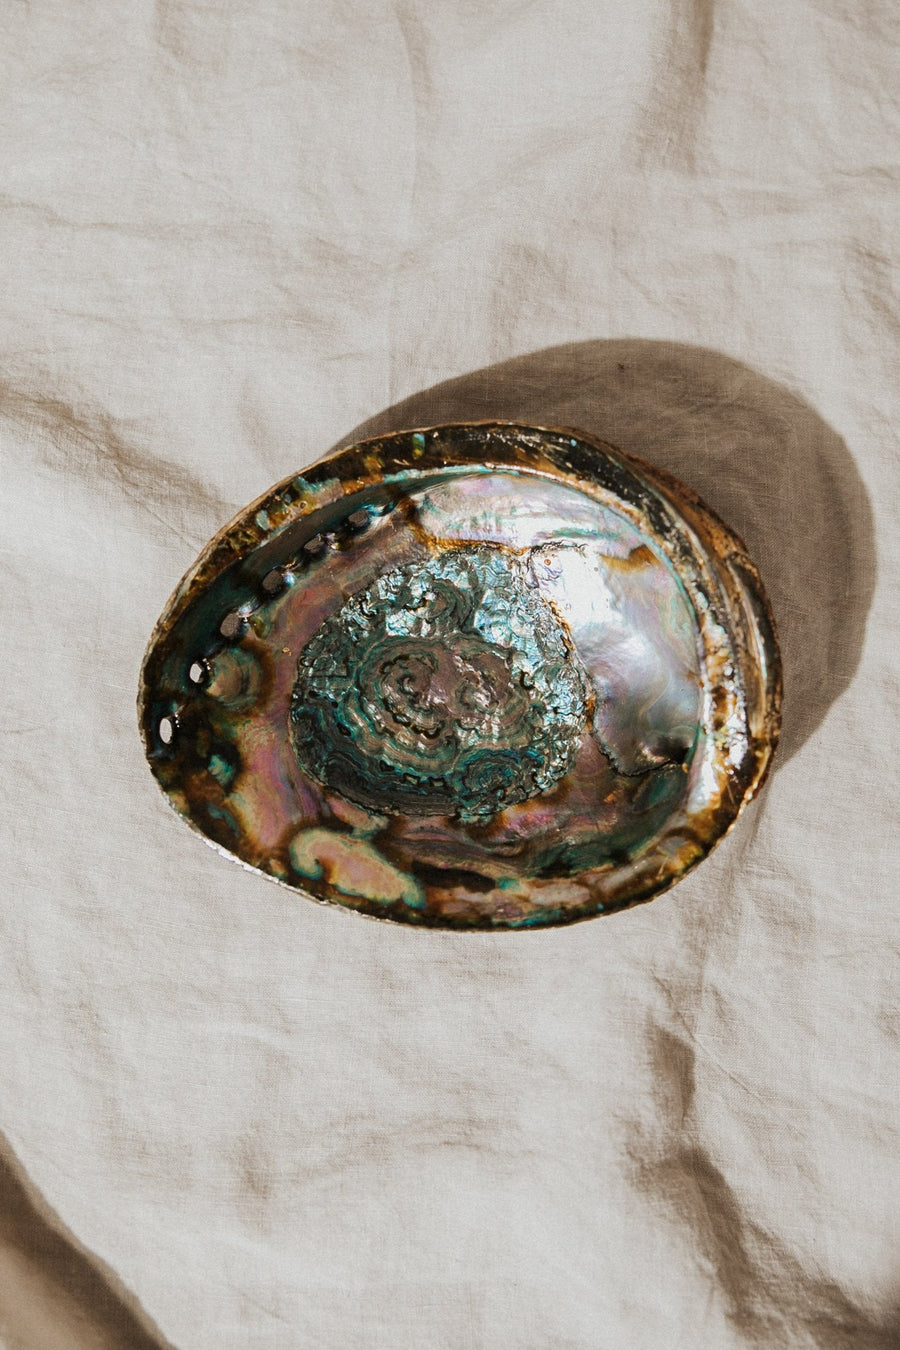 om imports Objects Abalone / Large / FINAL SALE Treasured Things Abalone Offering Bowl